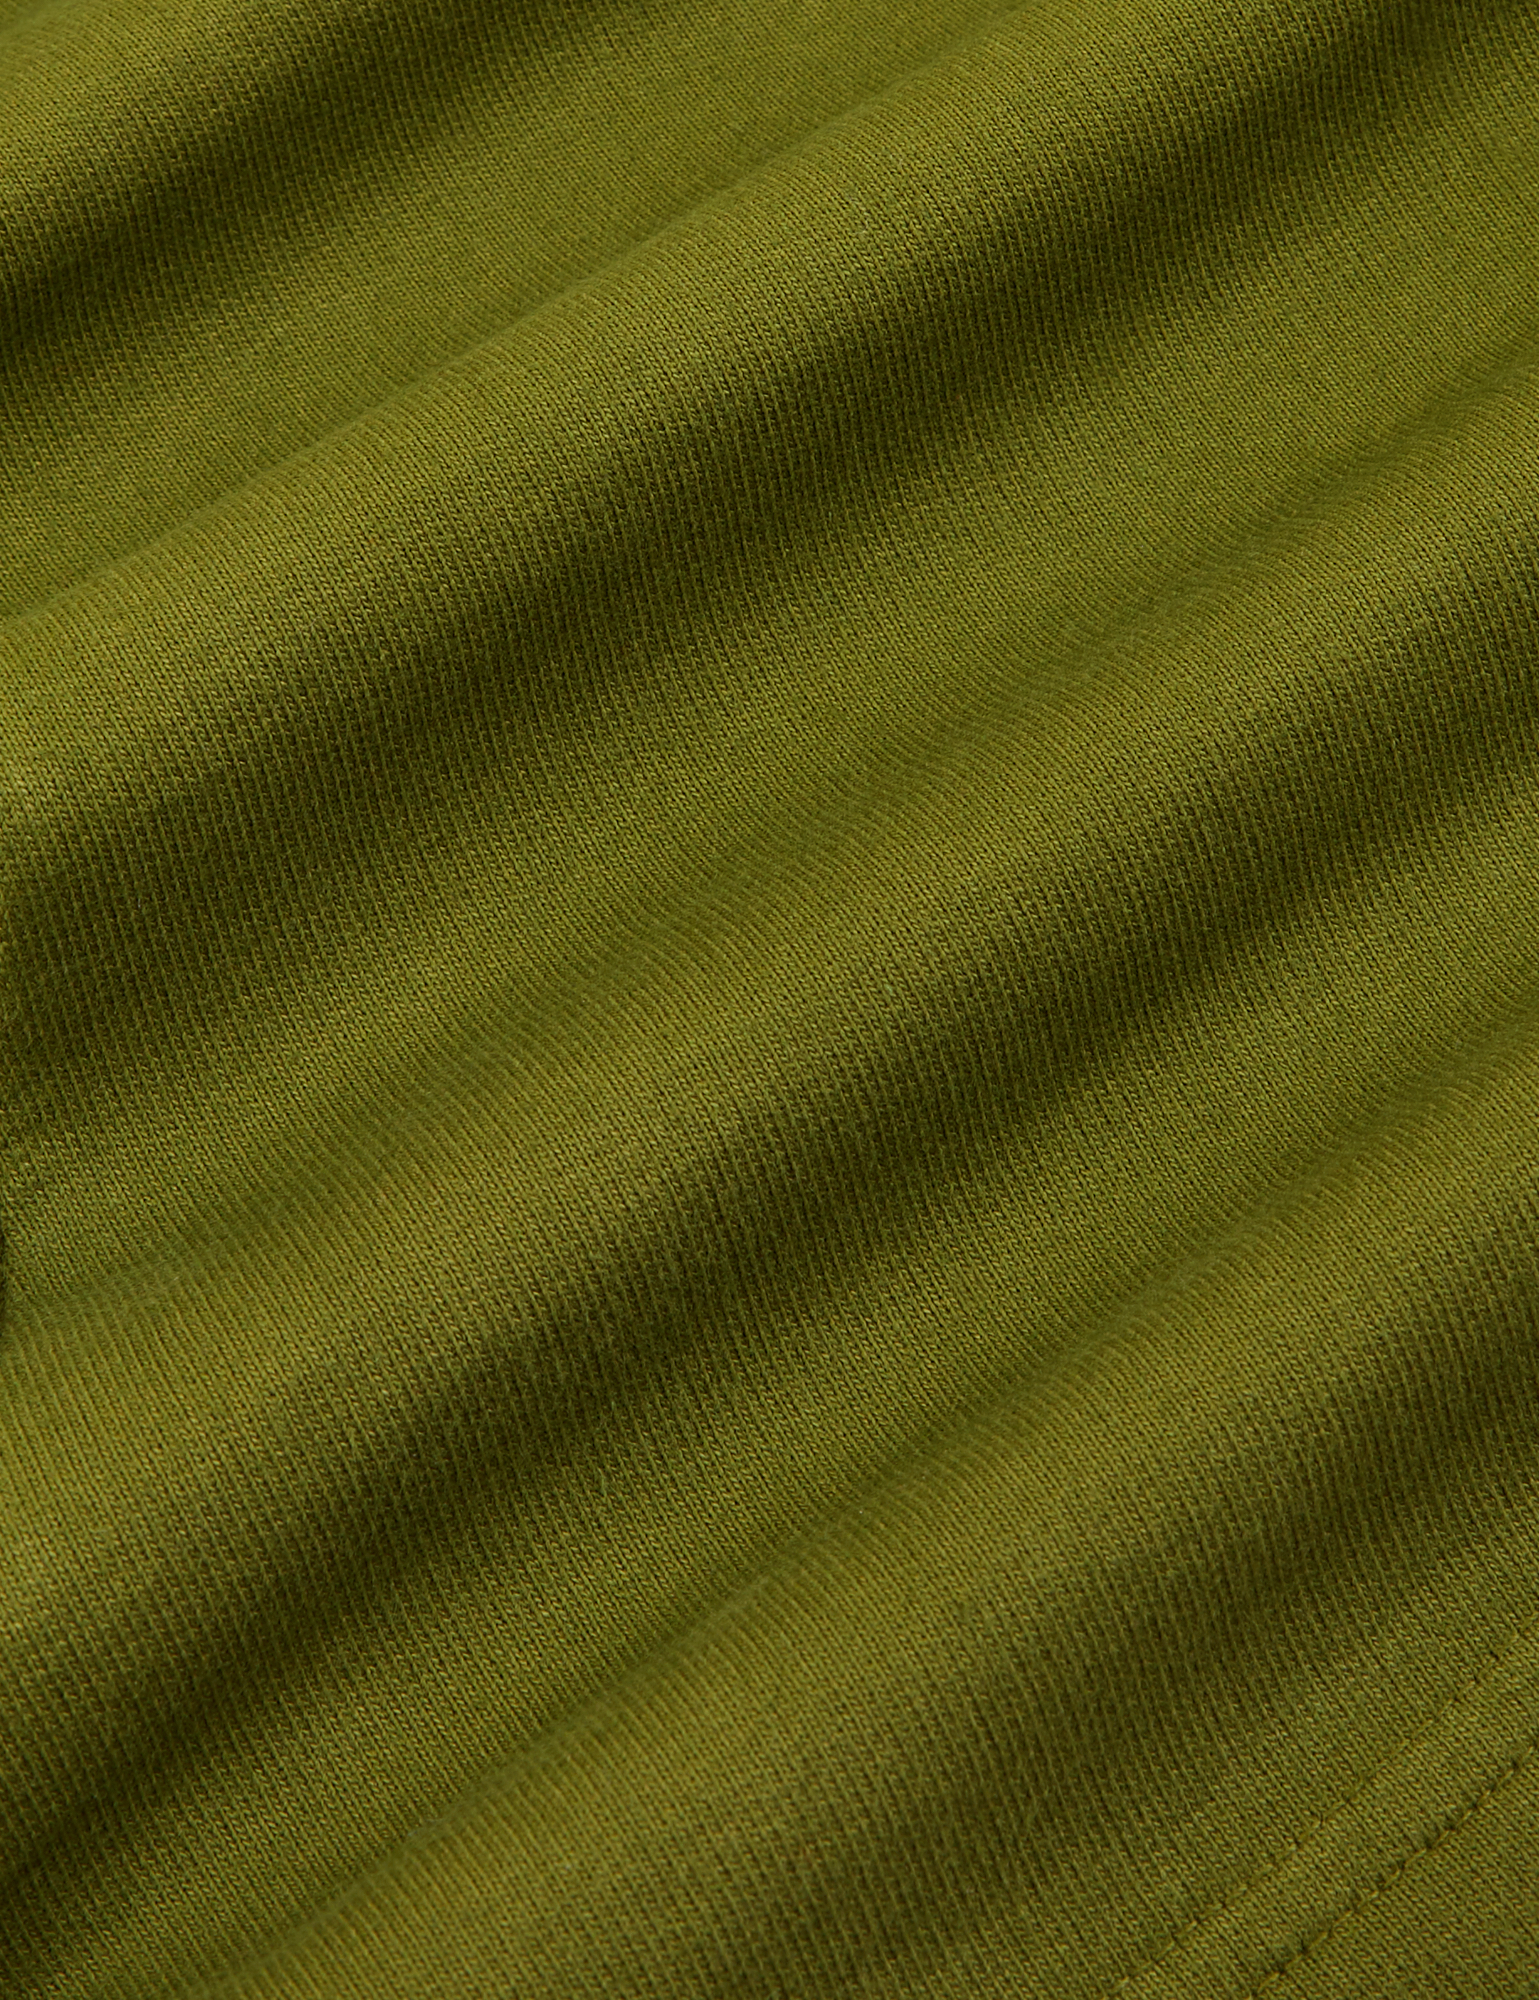 Lightweight Sweat Shorts in Summer Olive fabric detail close up